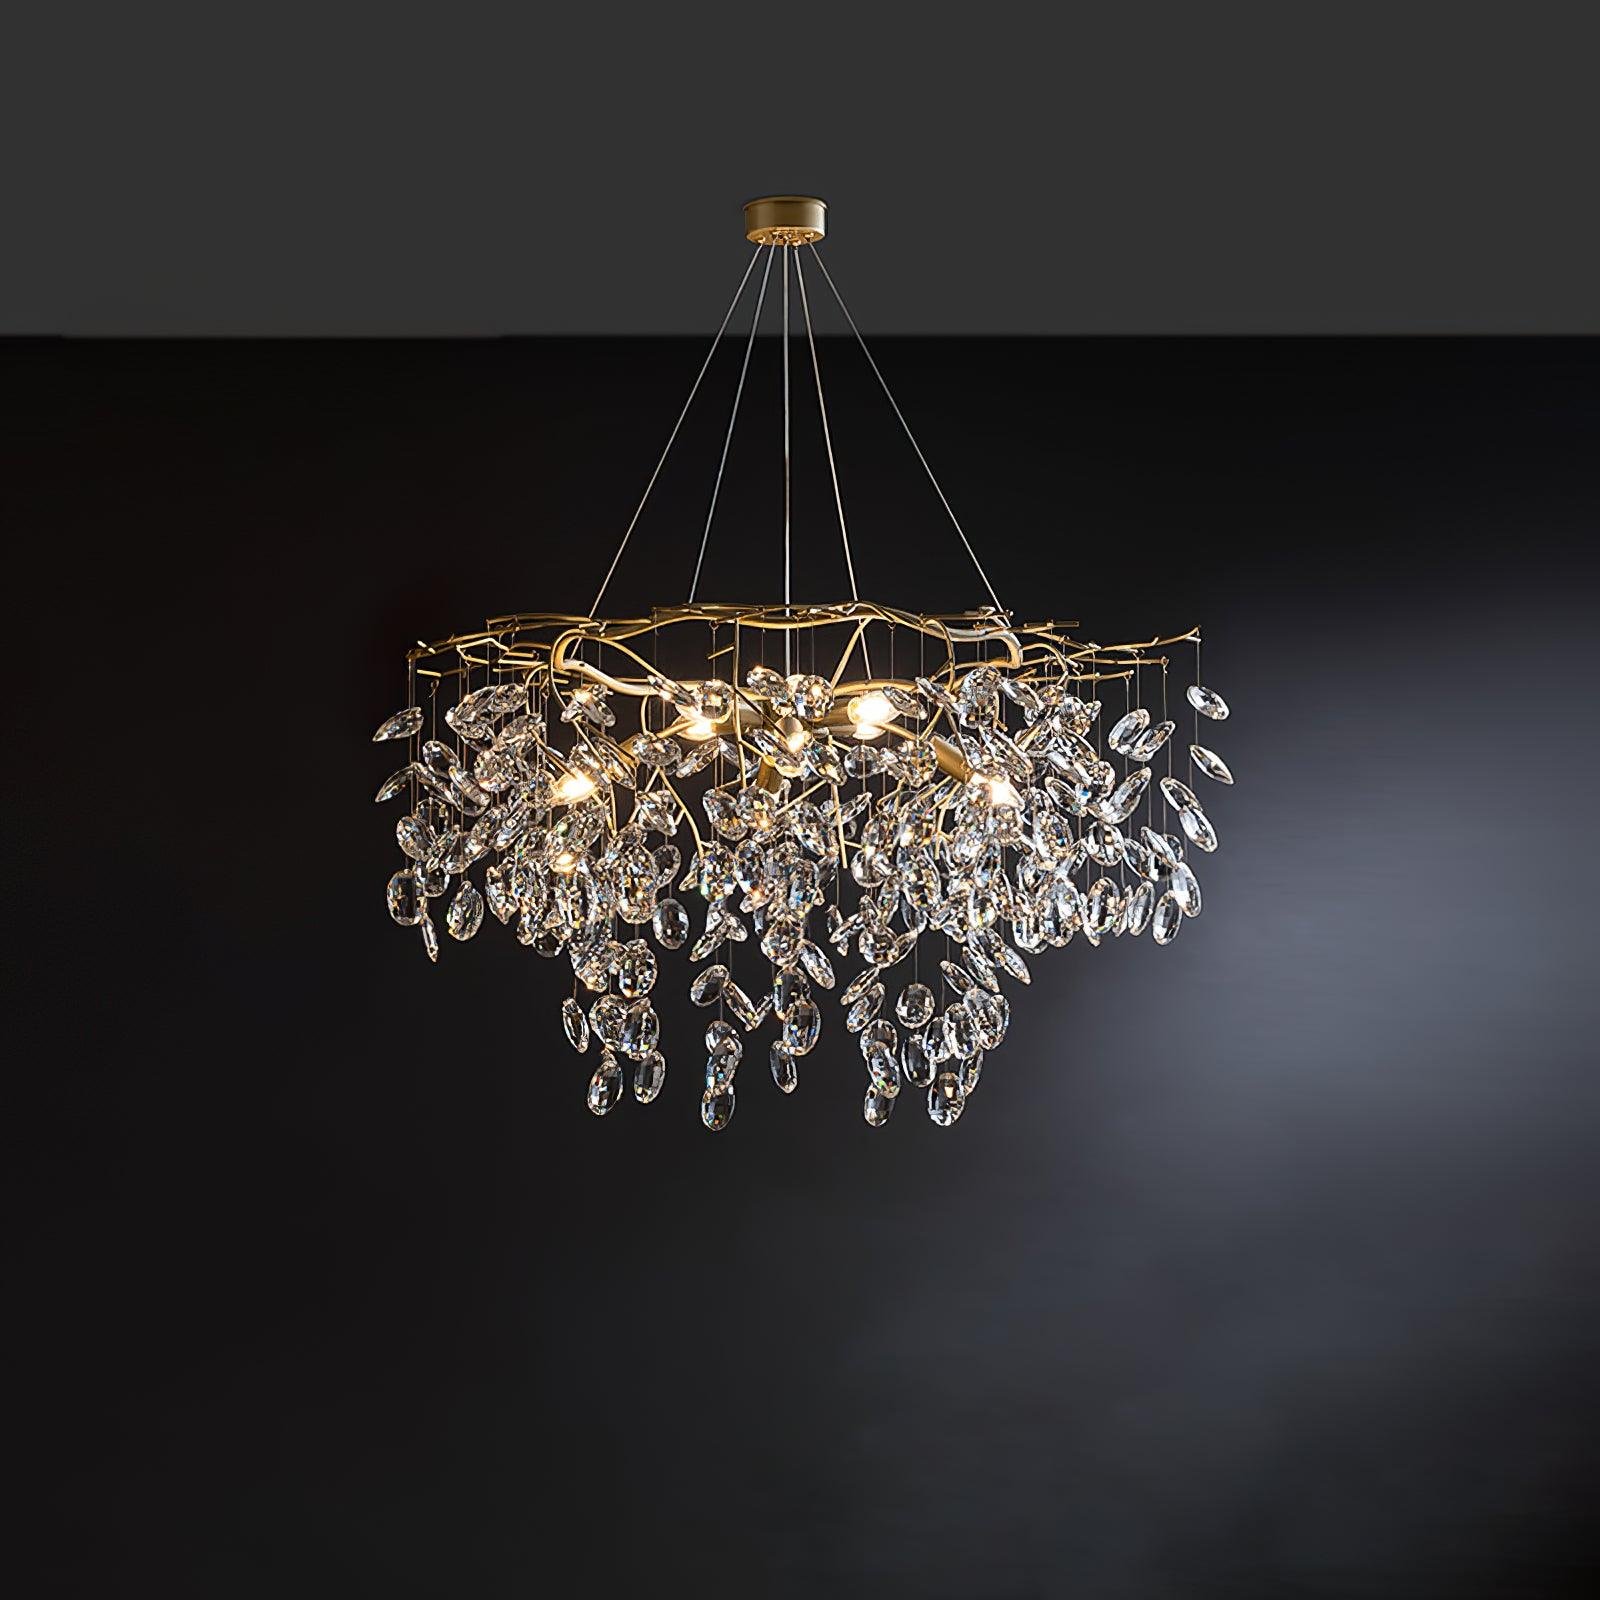 Brass Sofia Chandeliers measuring 34.2" in diameter and 12.5" in height (87cm x 32cm)